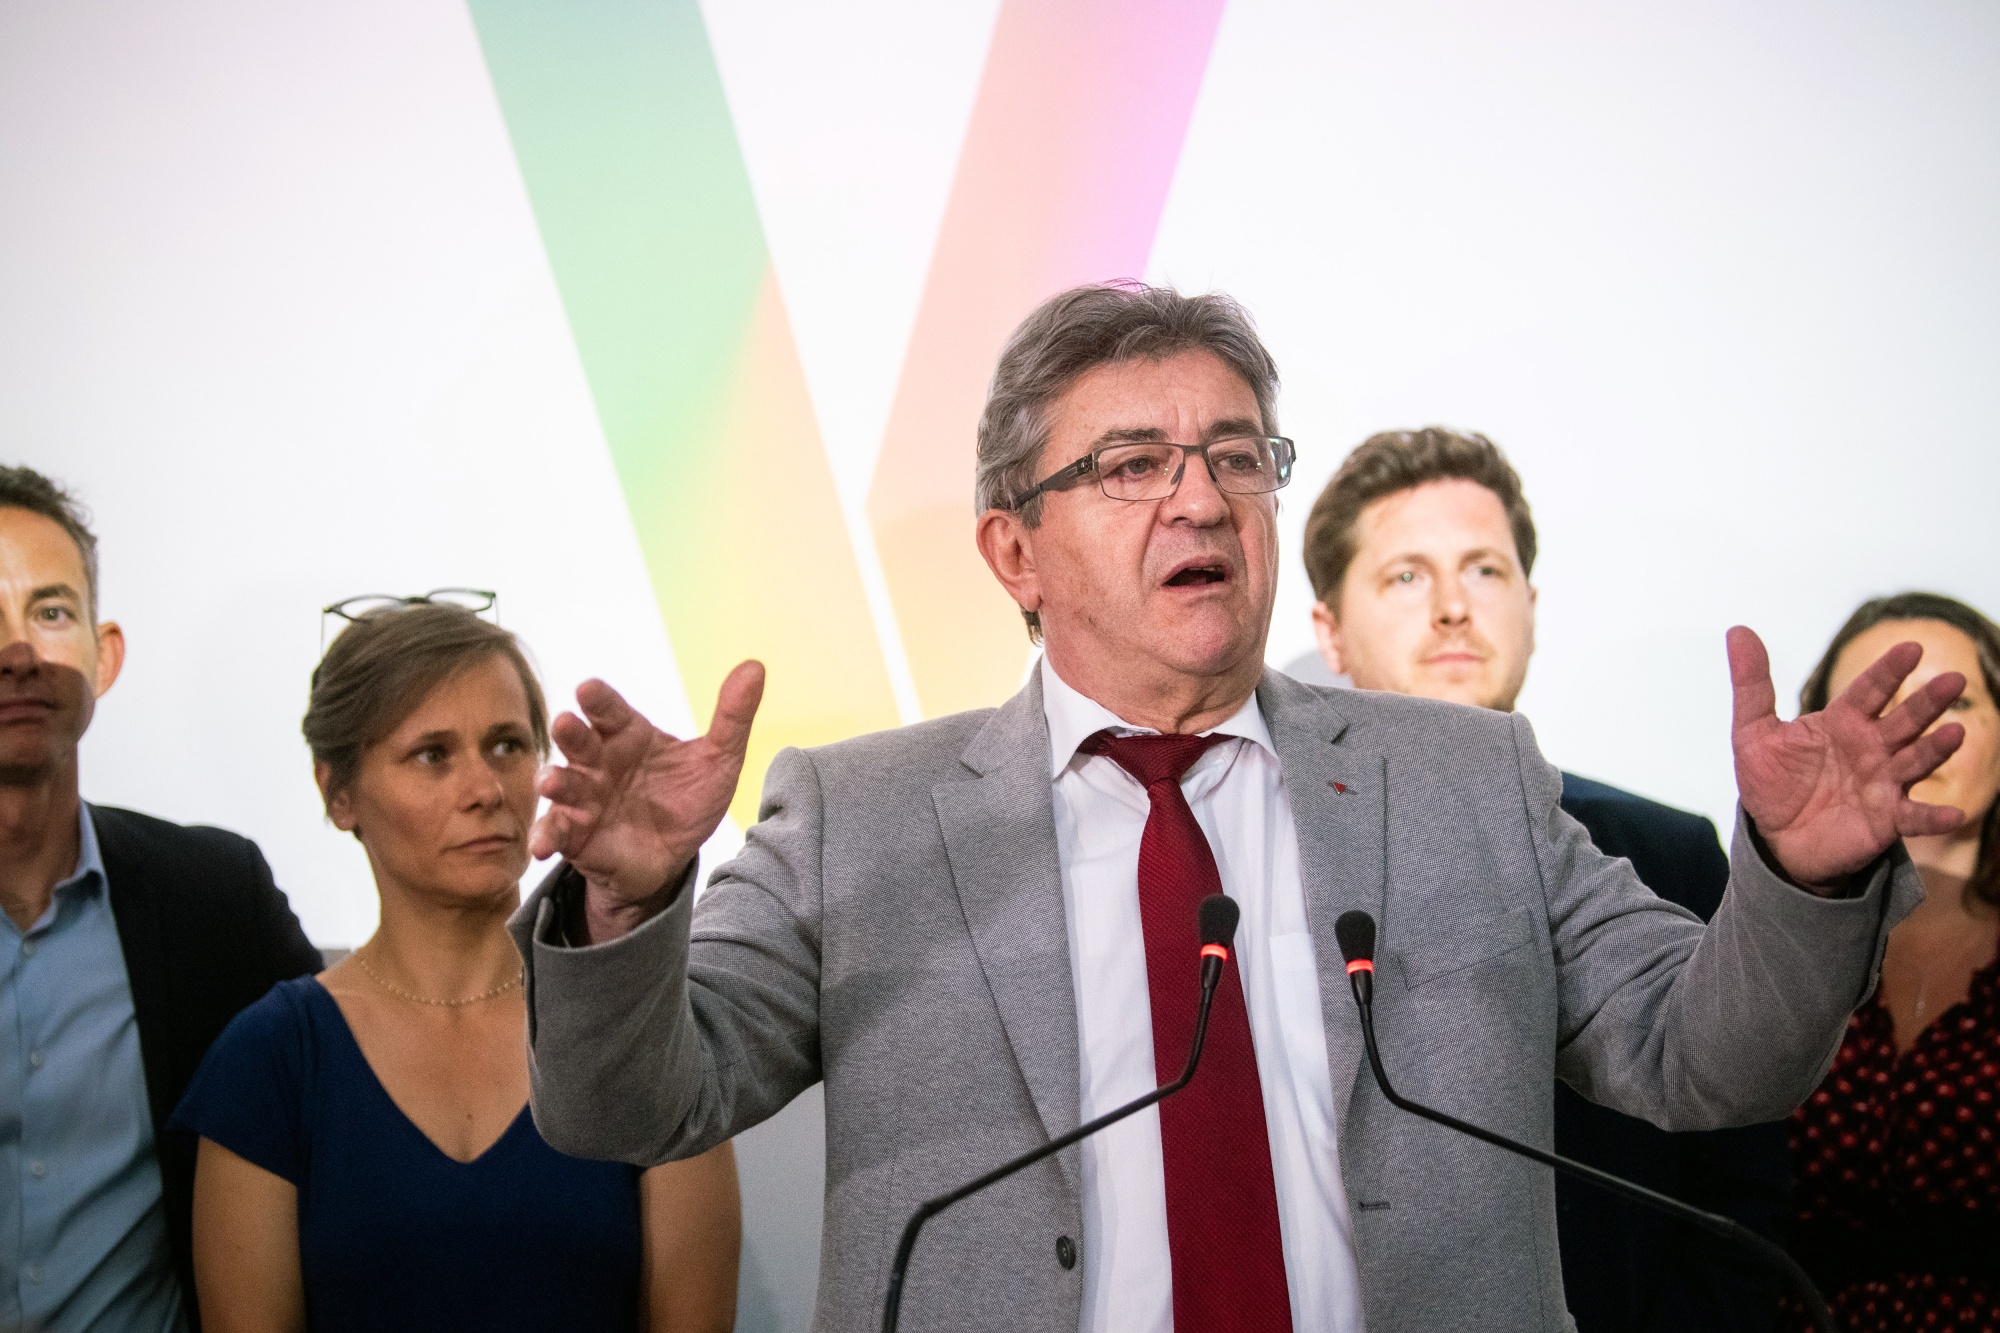 Jean-Luc Melenchon, leader of the France Unbowed party, speaks during an election night event in Paris,&nbsp;on June 12.&nbsp;